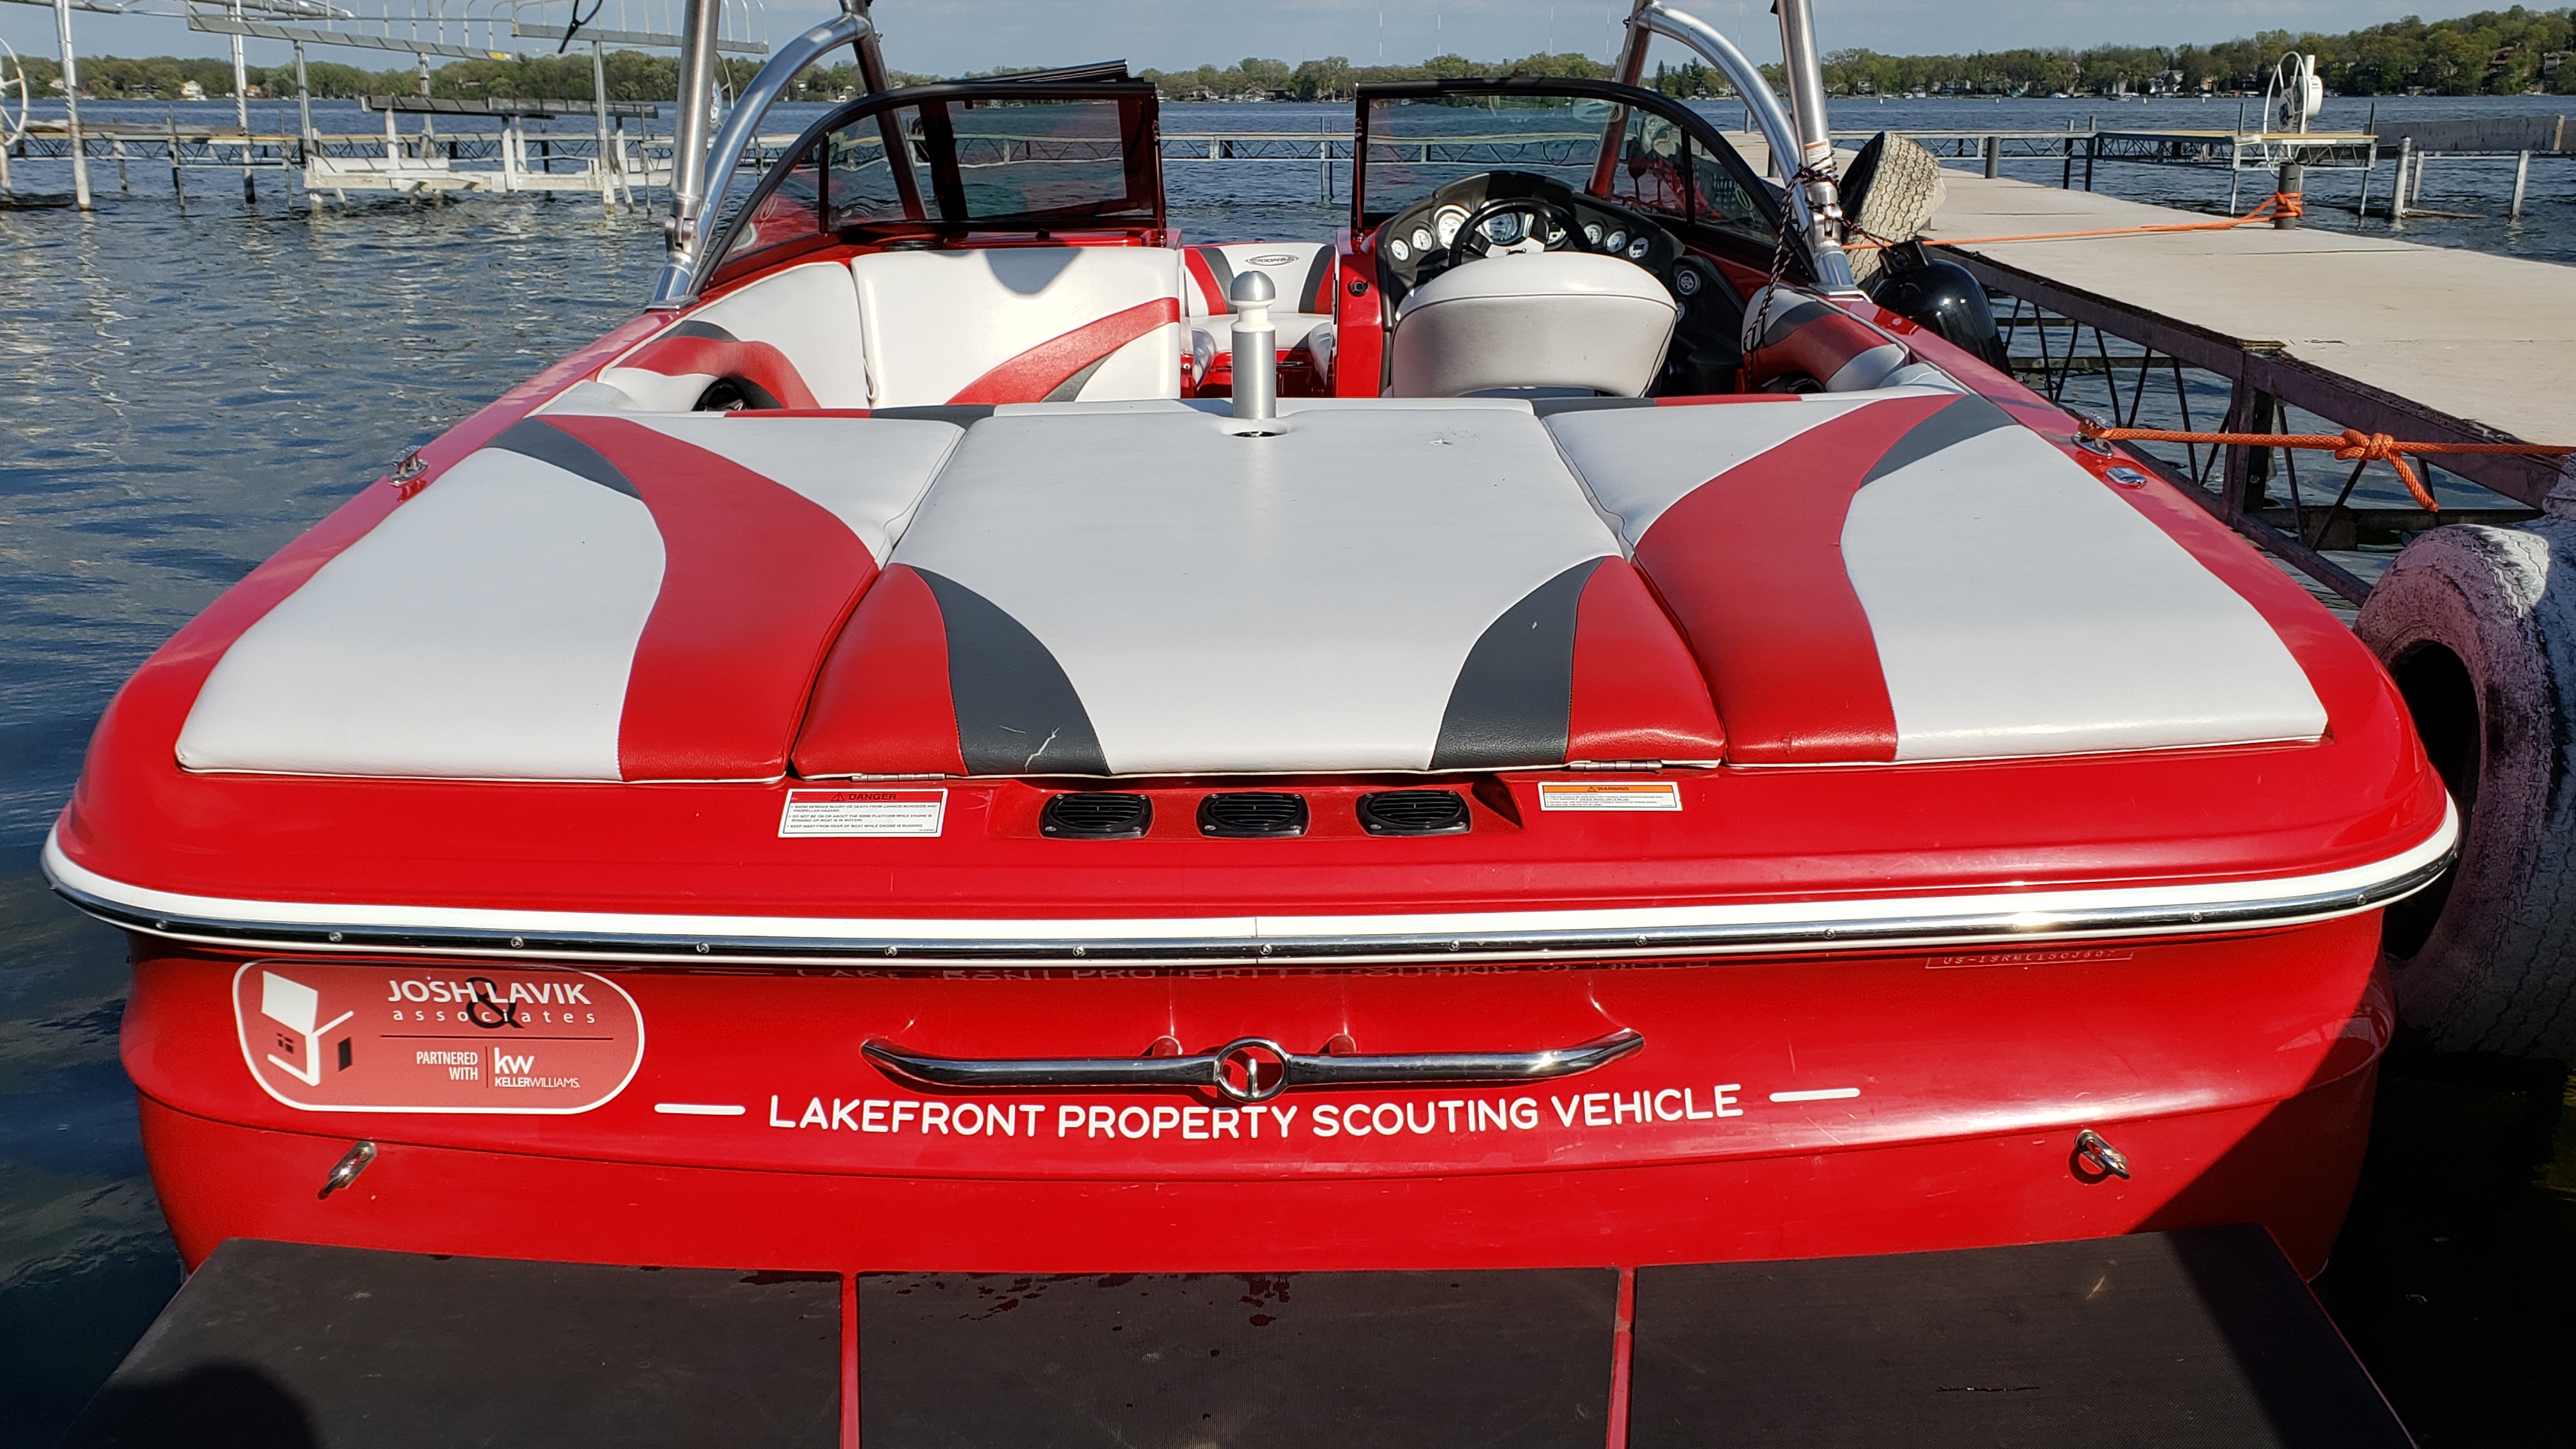 Lakefront Property Scouting Vehicle